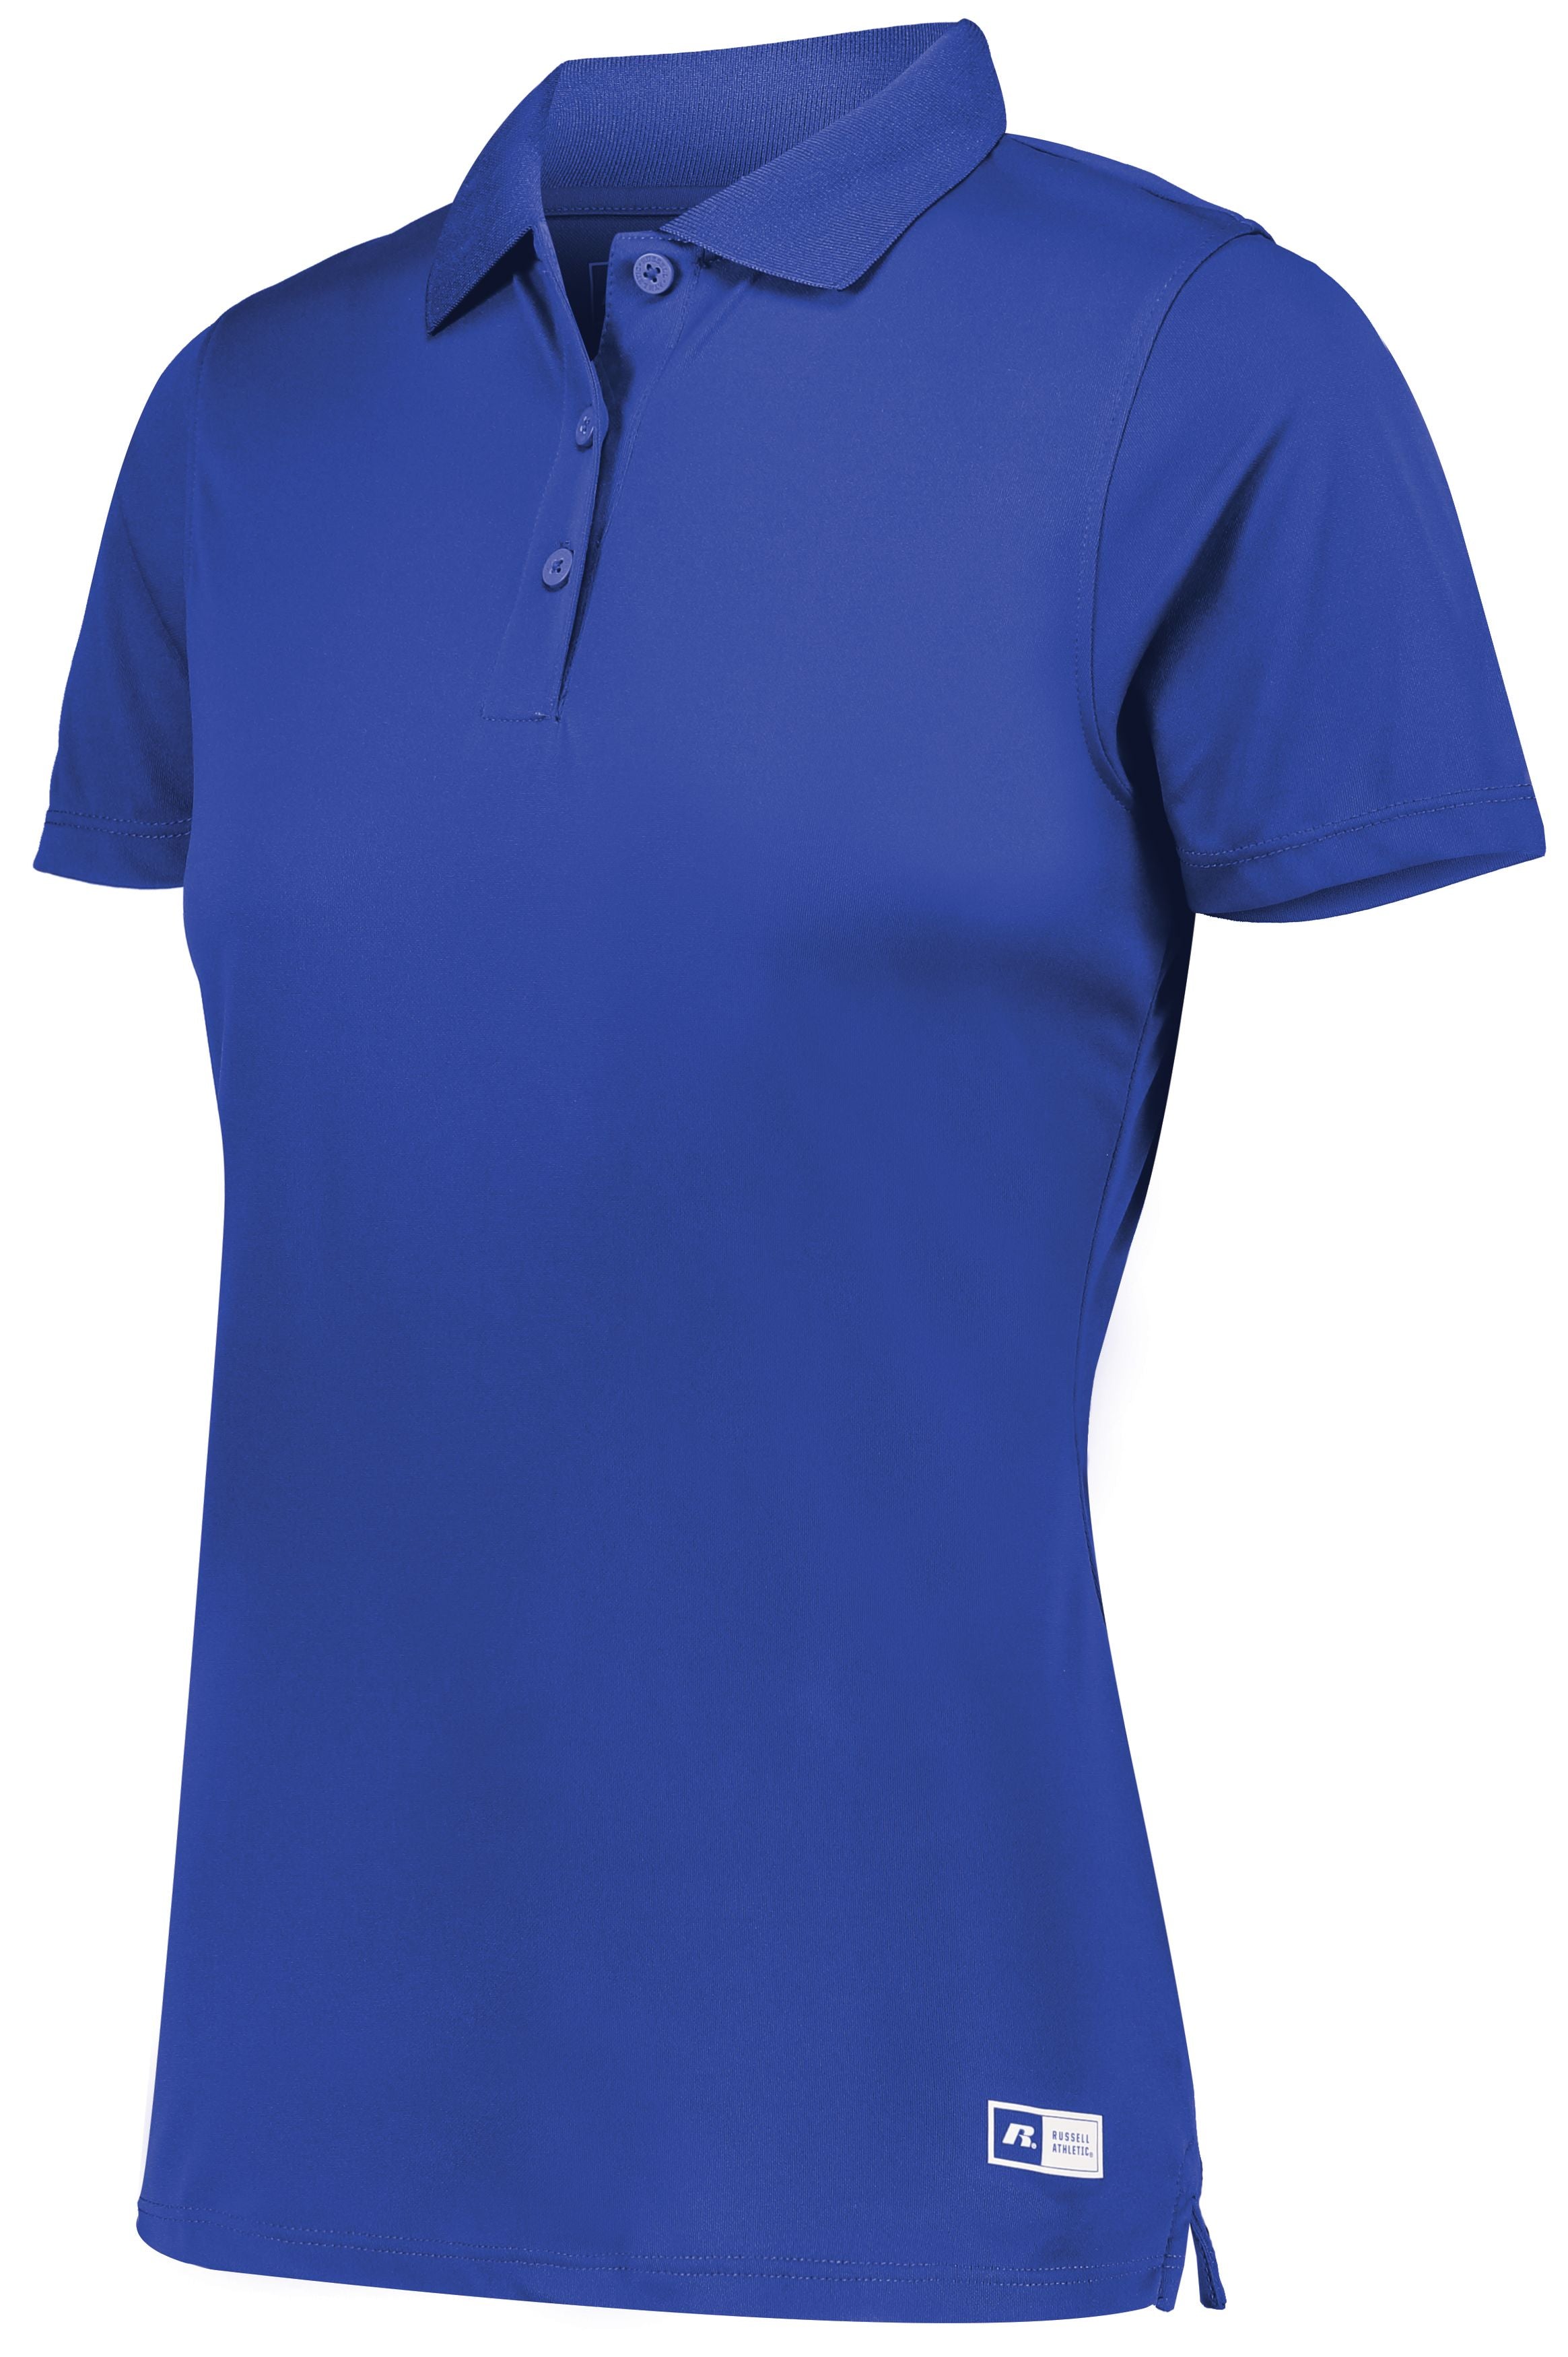 Russell Athletic Ladies Essential Polo in Royal  -Part of the Ladies, Ladies-Polo, Polos, Russell-Athletic-Products, Shirts, Corporate-Collection product lines at KanaleyCreations.com